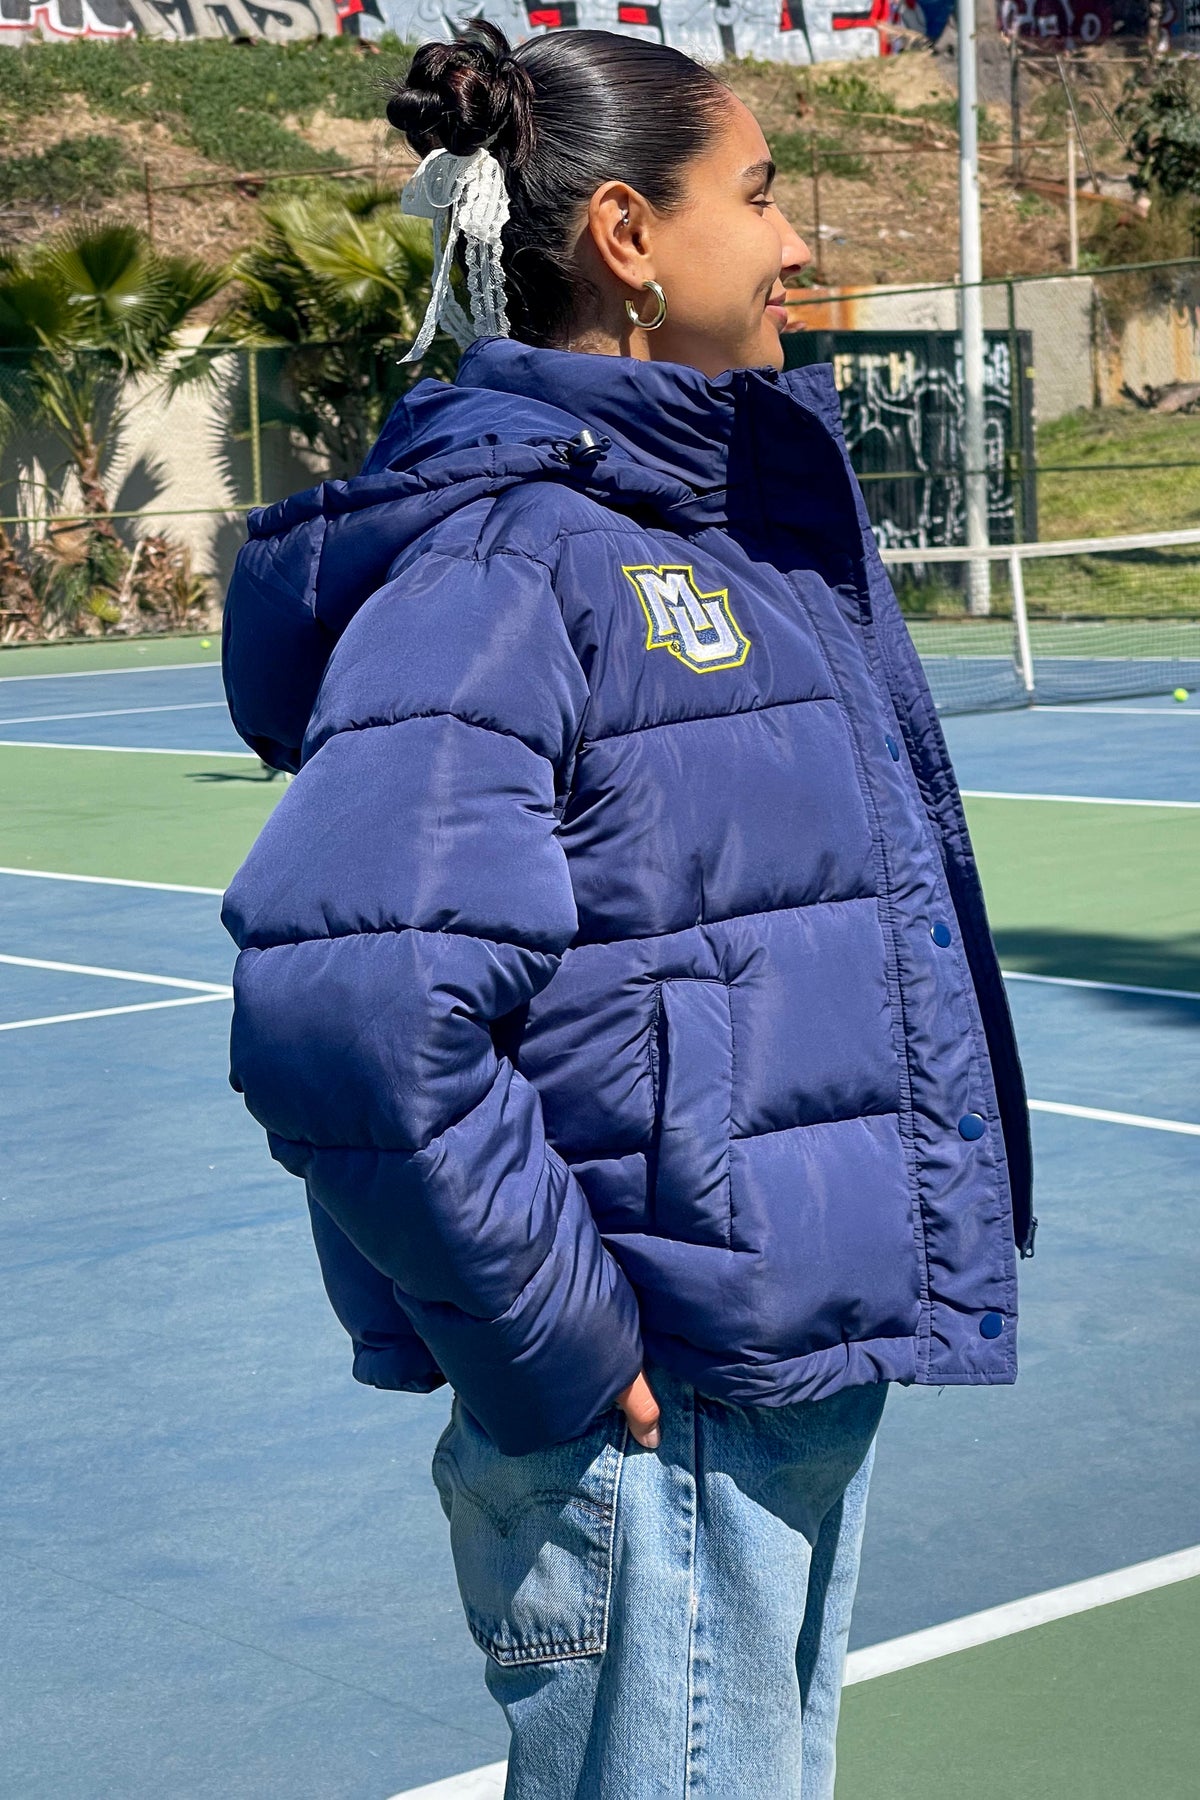 Marquette Puffer Jacket